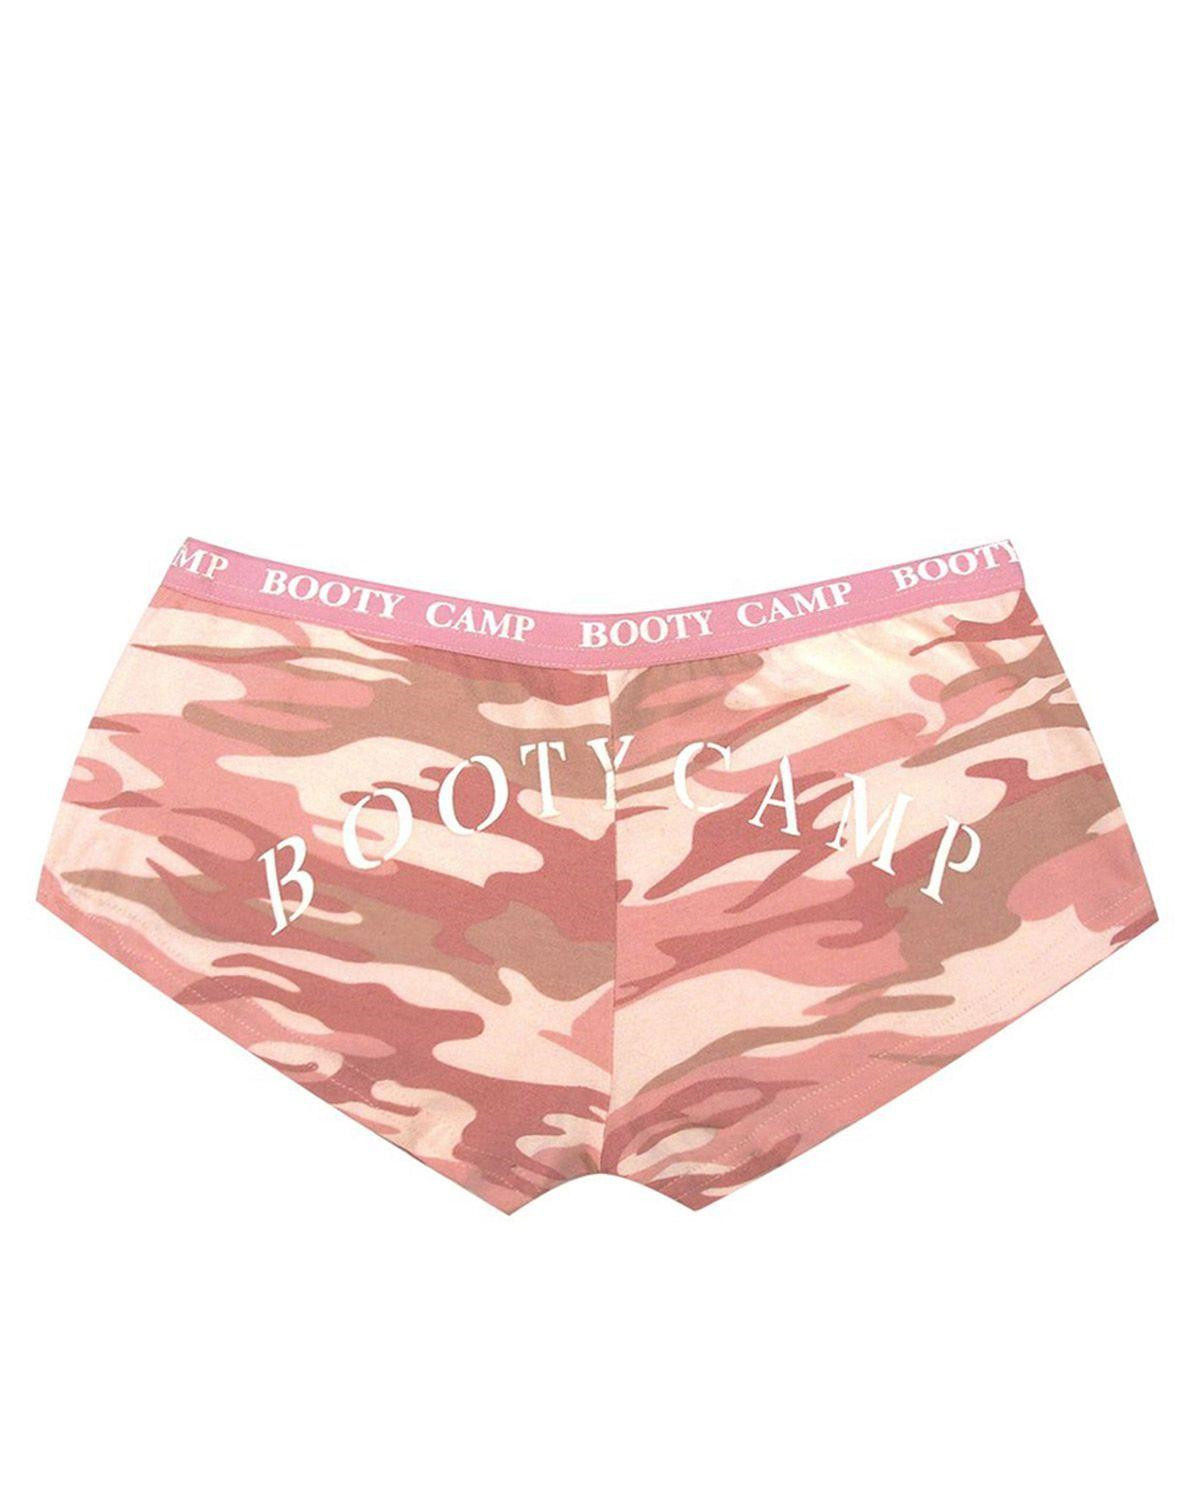 Rothco Trusser - 'Booty Camp' (Pink Camo, XL)